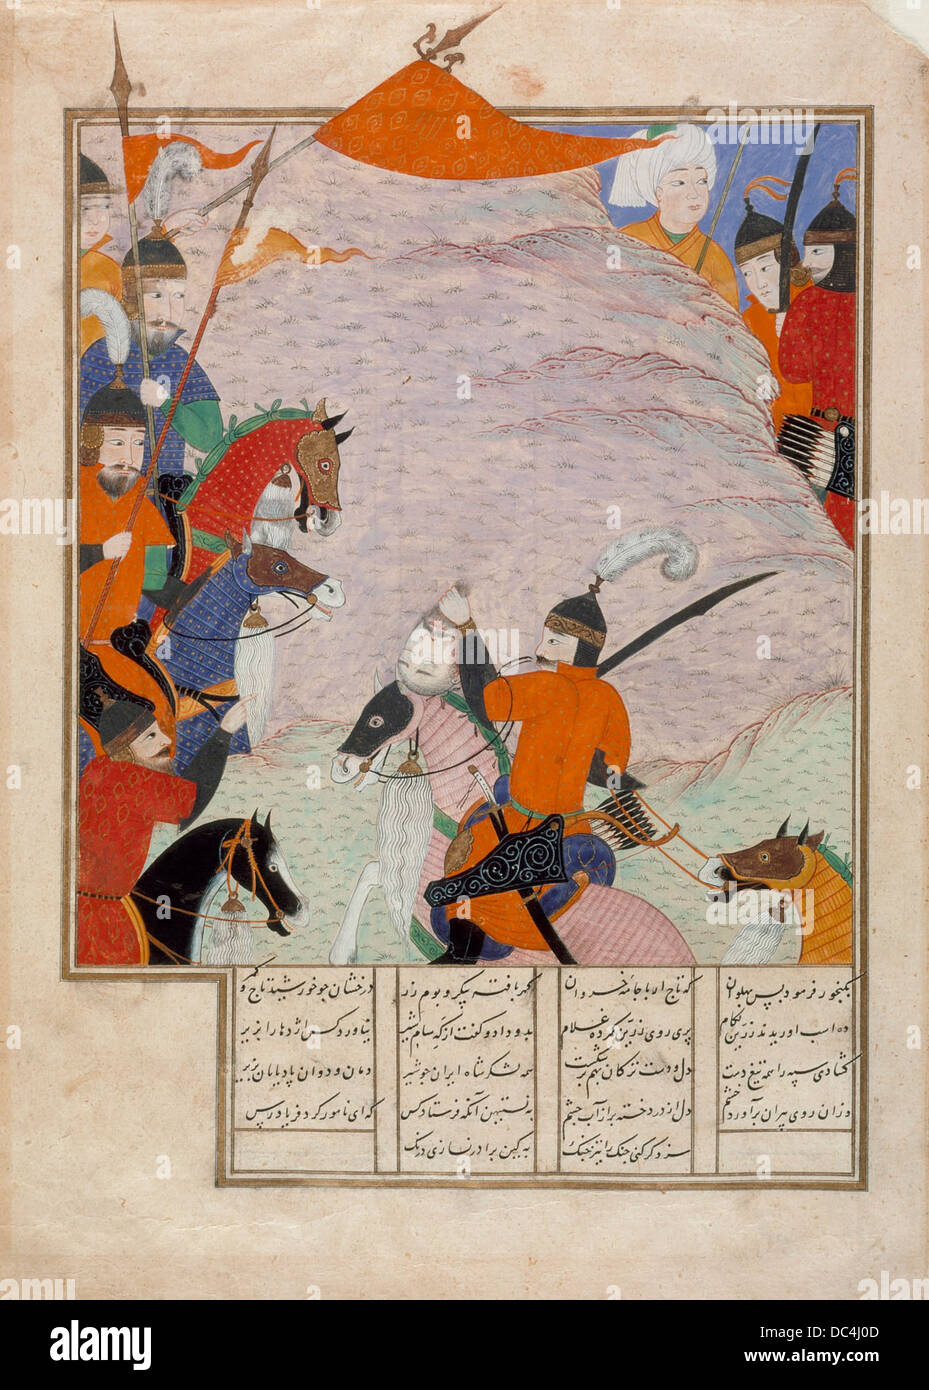 Bizhan Brings Back the Head of Human, Page from a Manuscript of the Shahnama (Book of Kings) M.85.237.71 Stock Photo